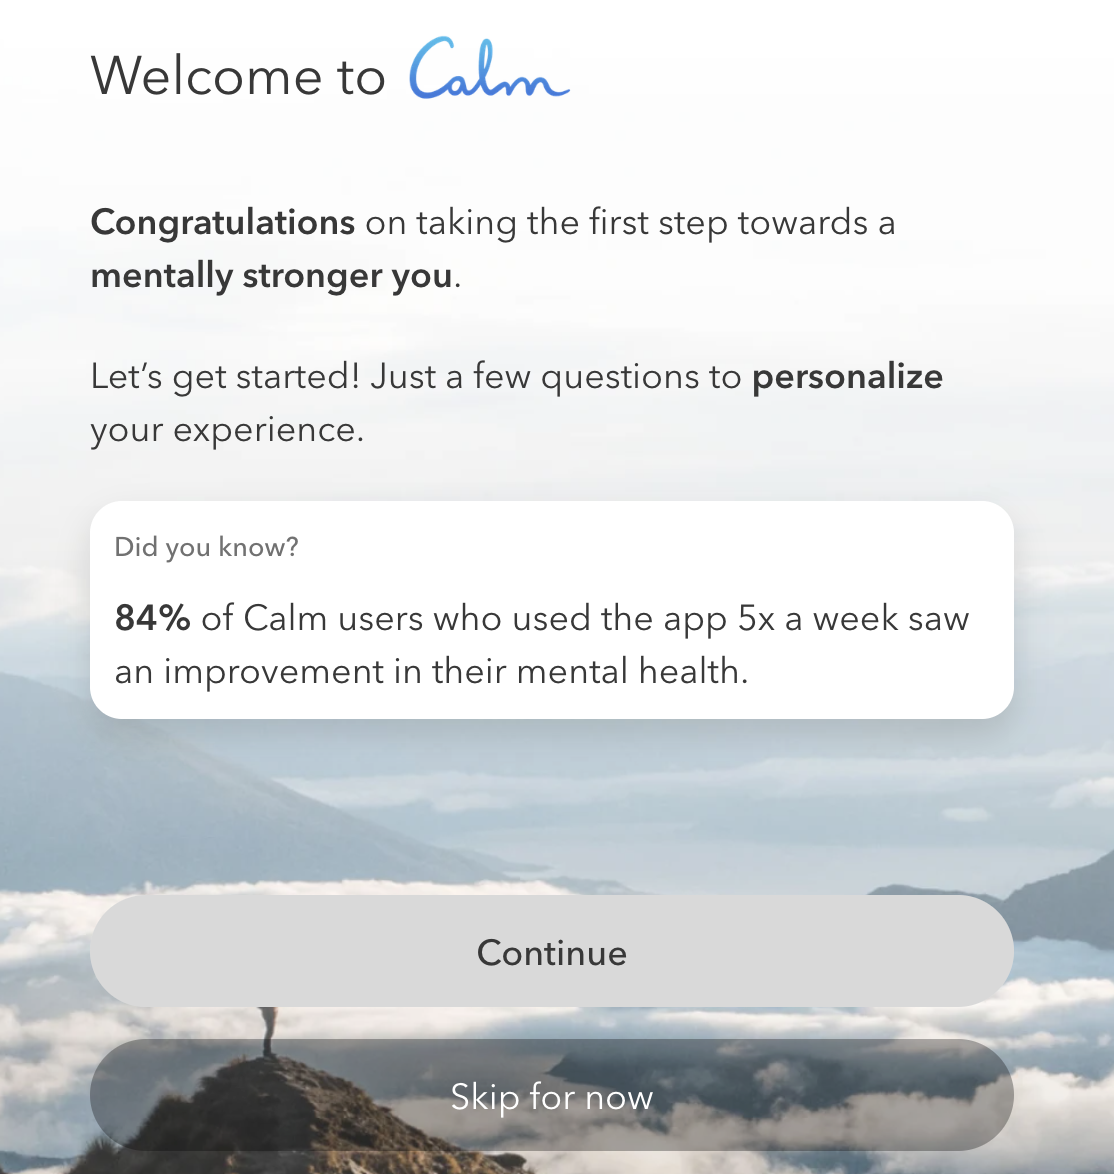 Screenshot of a meditation app that uses its data to help with social proof